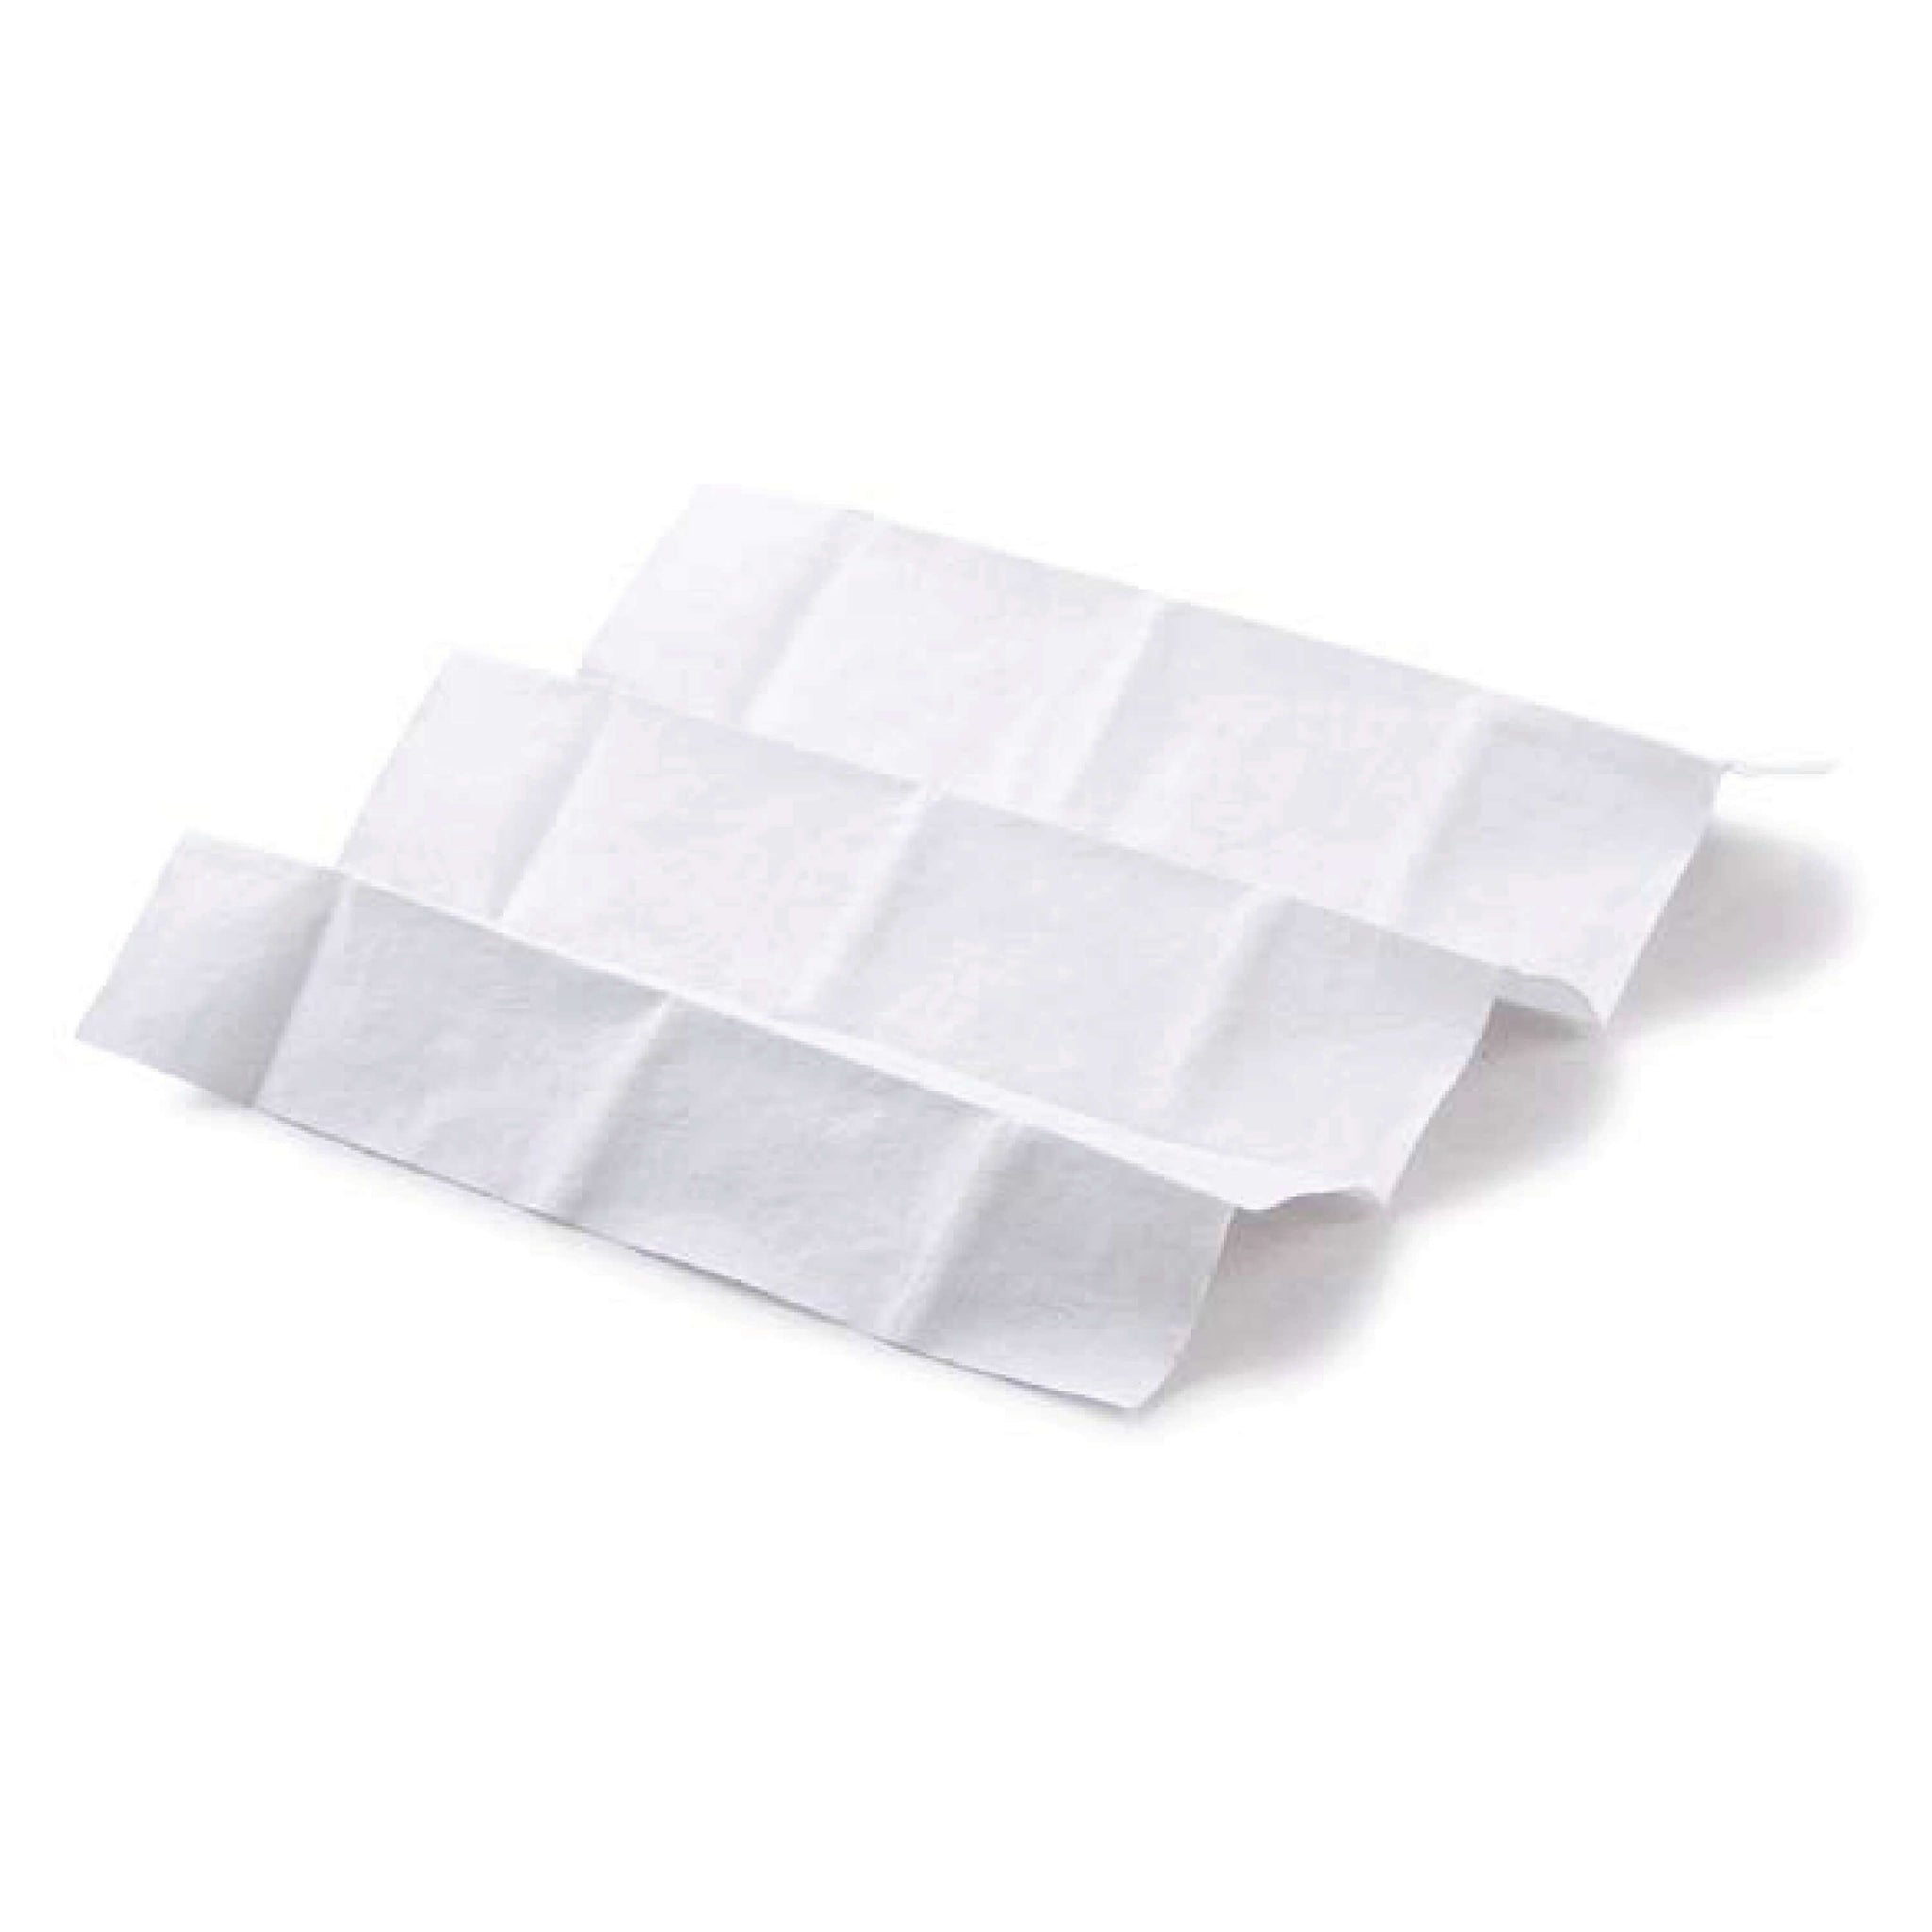 Resoclear Sterile Wipes- Box of 24